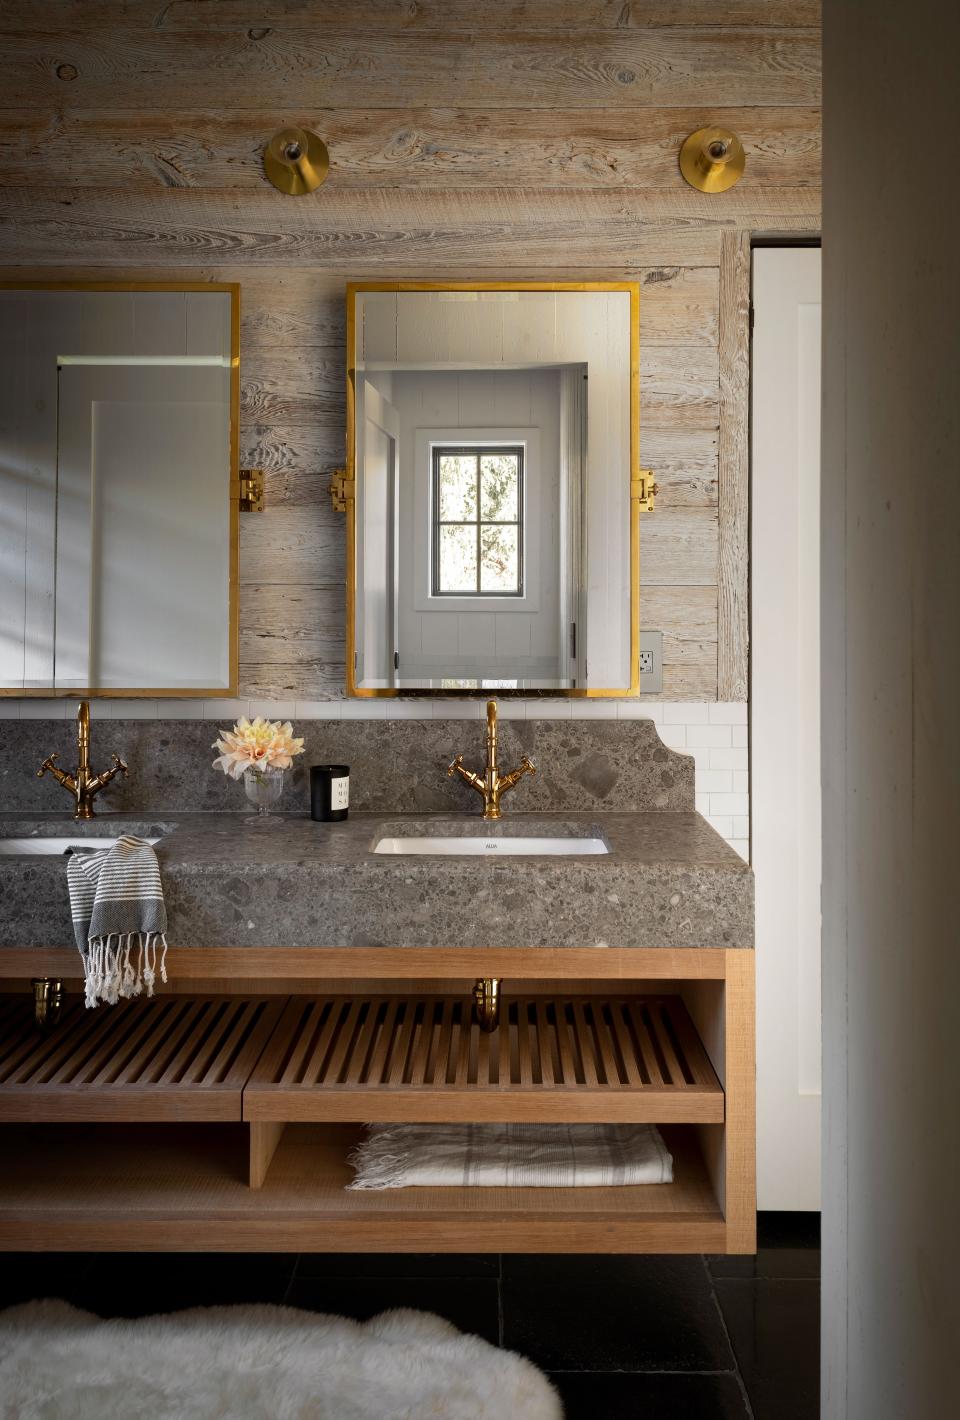 In this bathroom, we see a white oak vanity with Ceppo de Gre marble from ABC Stone. The unlacquered brass mirrors are from Urban Archaeology, and the minimalist wall sconces are from Allied Maker.